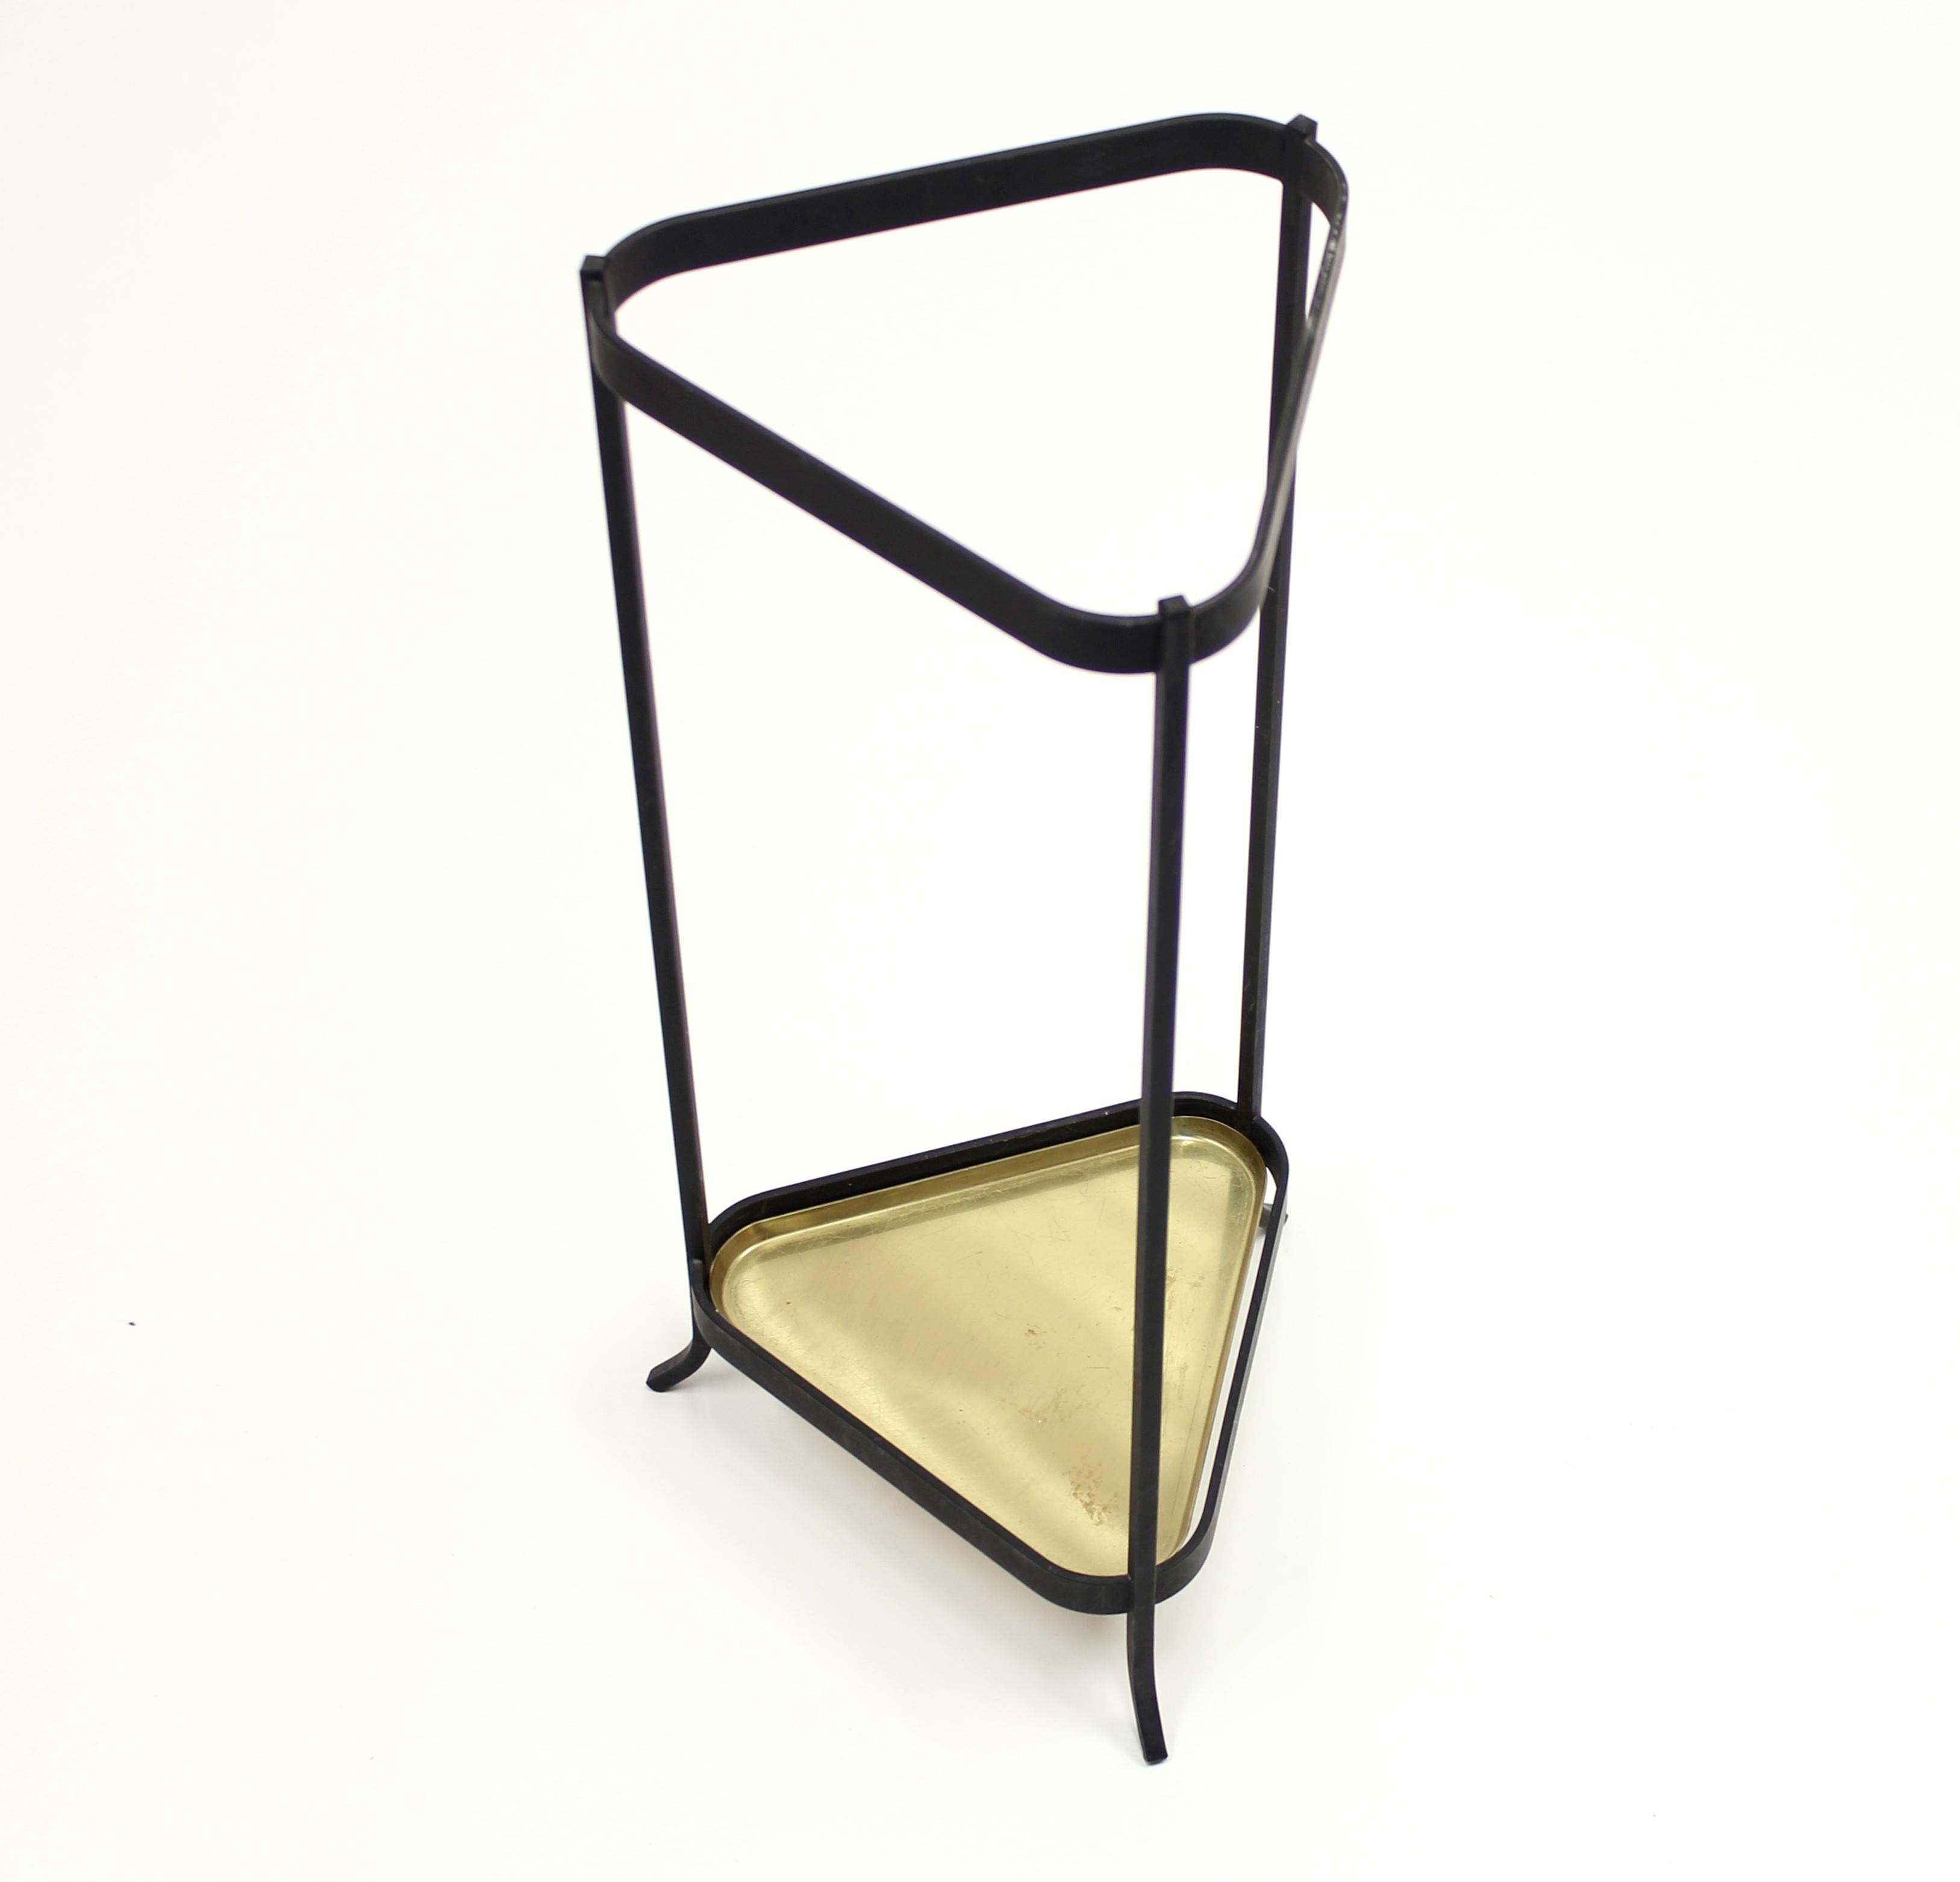 Triangular brass and metal 1960s umbrella stand by Swedish manufacturer Ystad Metall. Very good vintage condition.